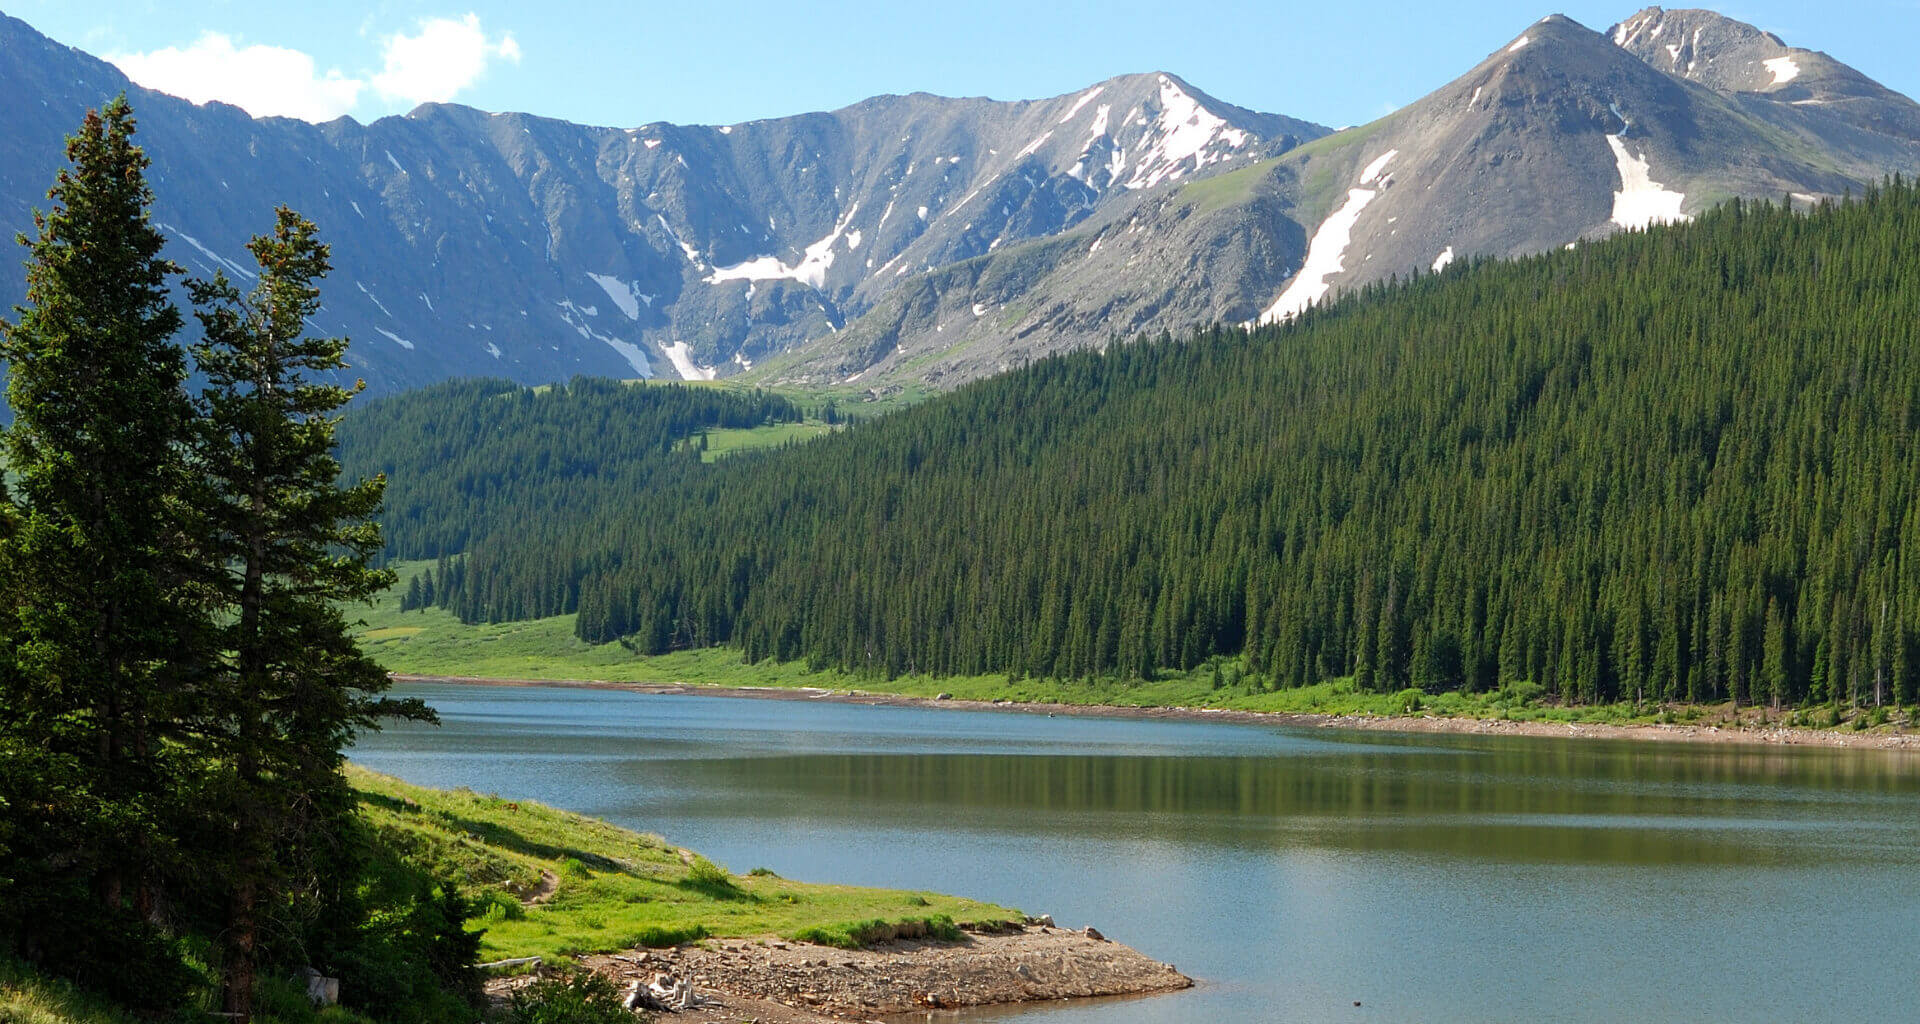 Green Mountain Reservoir on a blue sky day with mountains in the background, blue water, and green pine trees in the forefront. Green Mountain Reservoir is a hidden camping gem in Colorado.